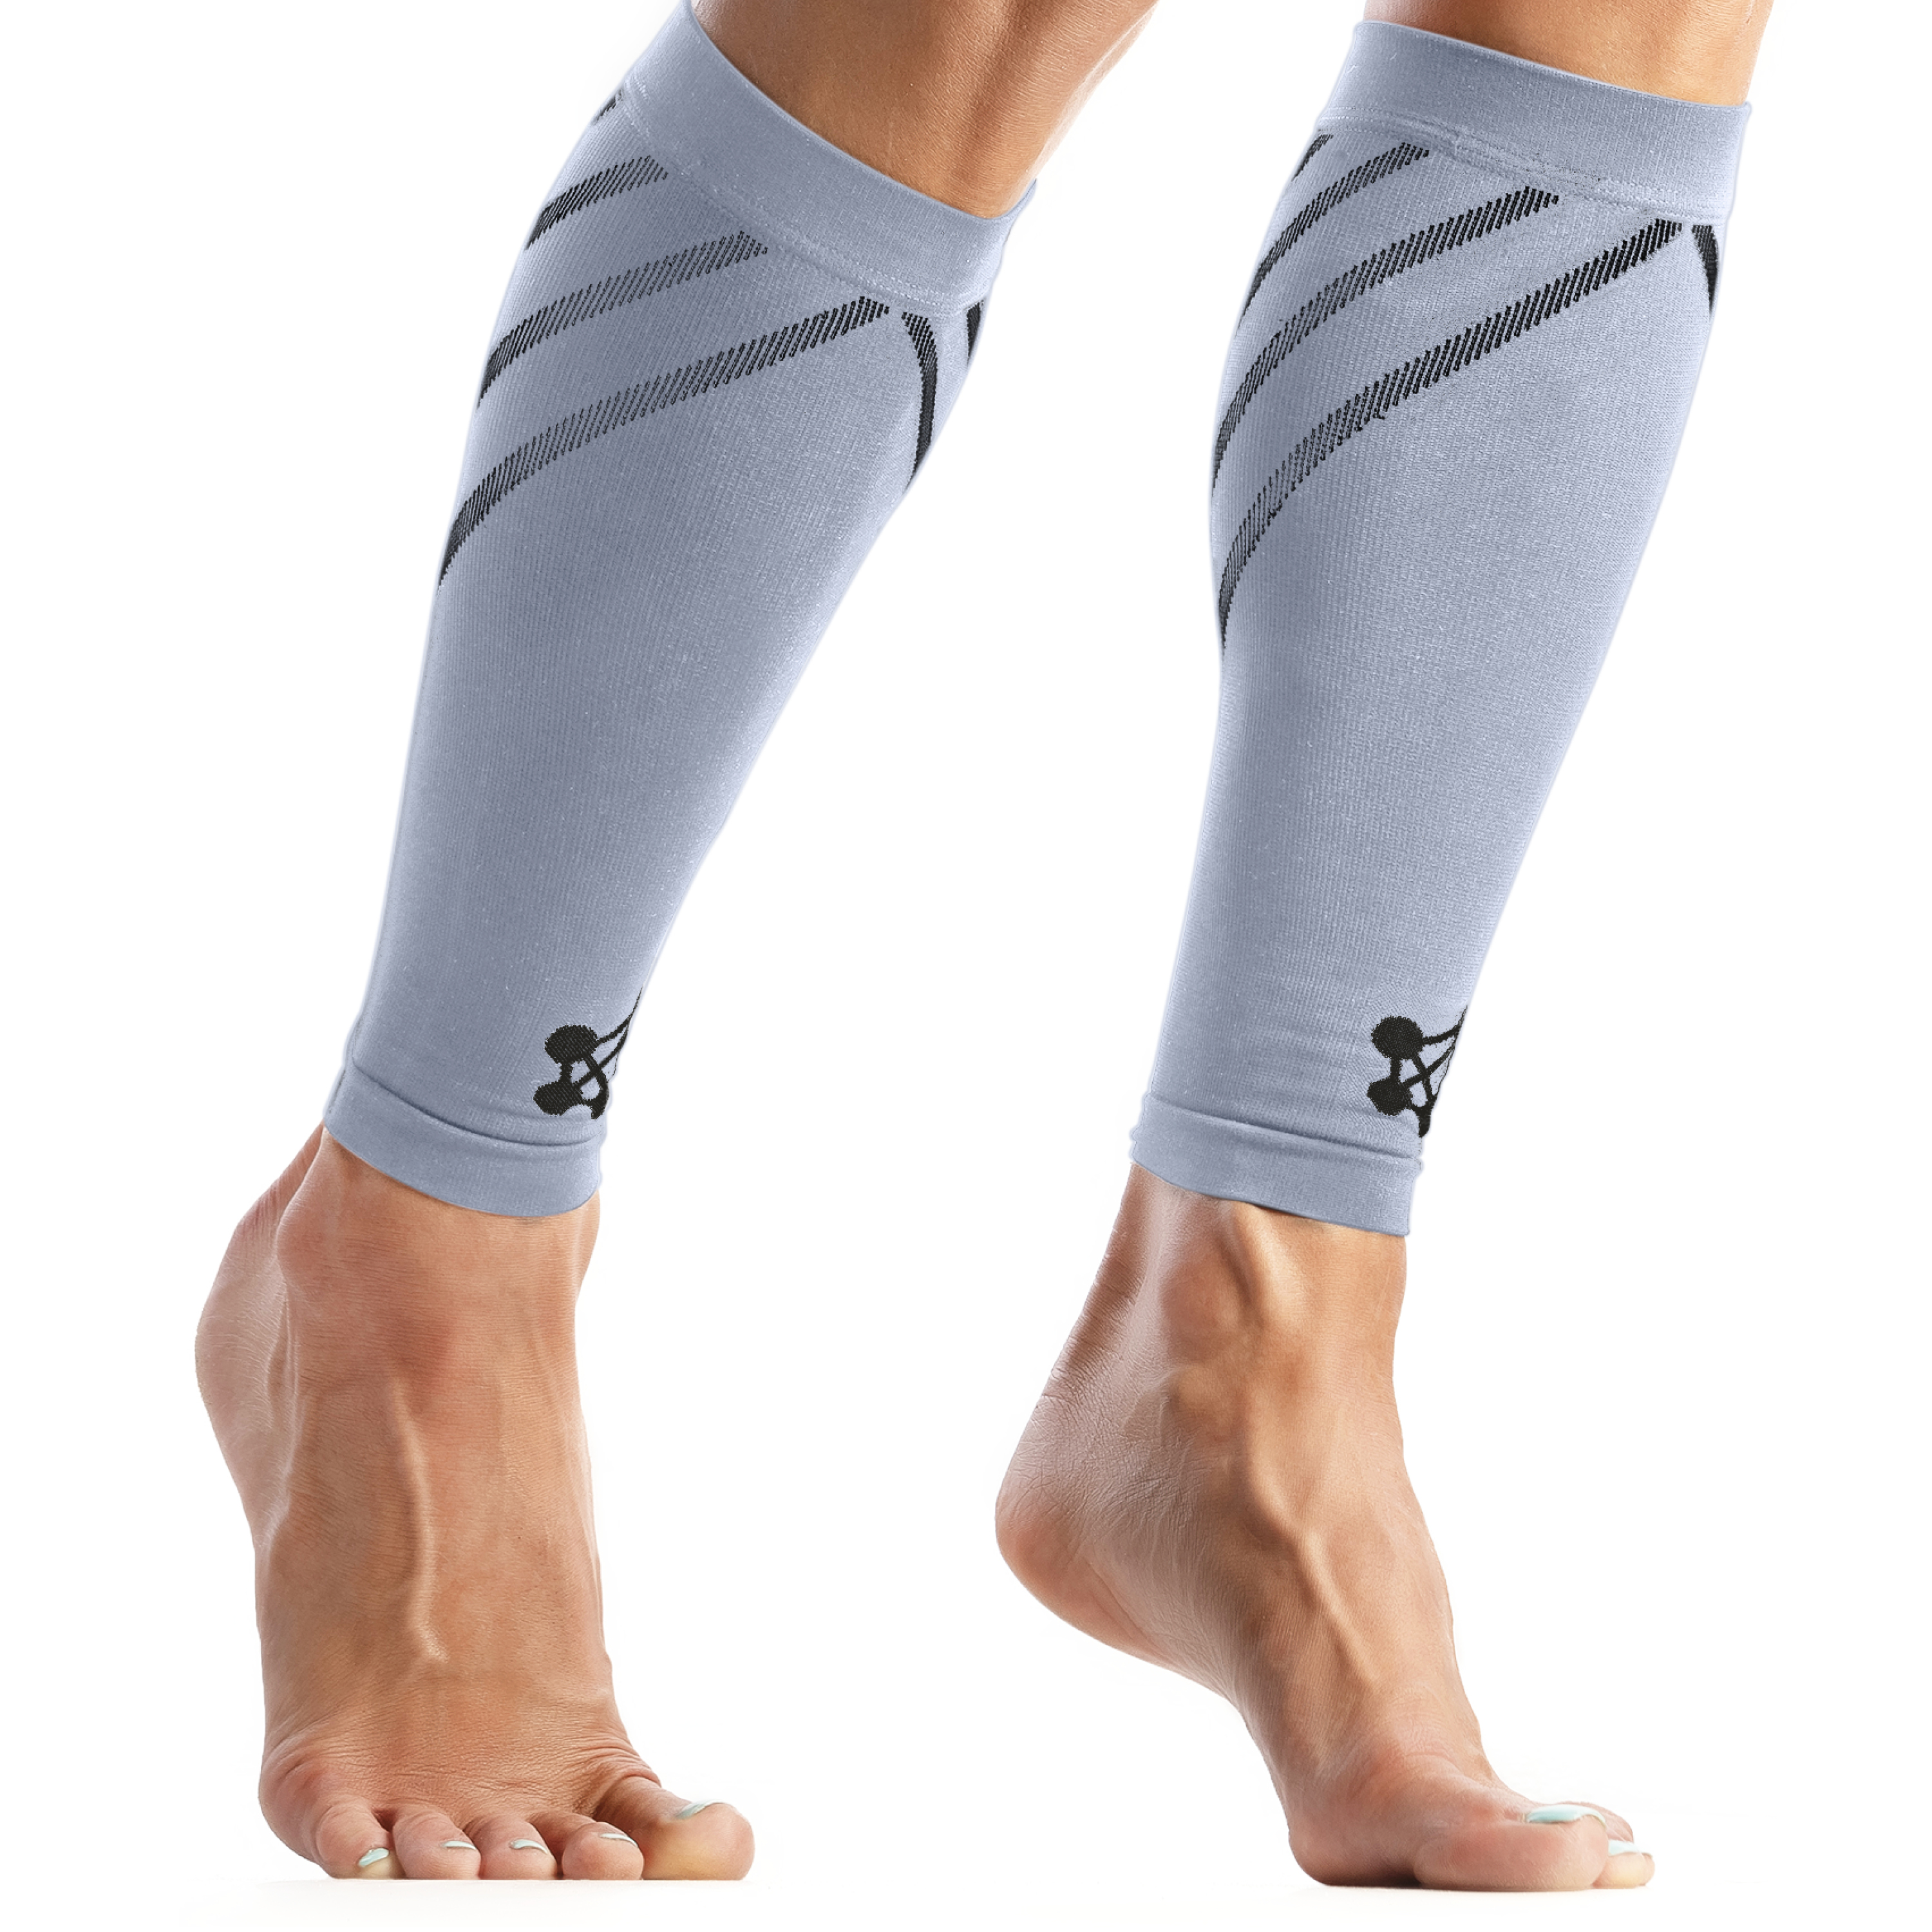 CopperJoint Launches New Compression Calf Sleeves Men in Grey and Blue on Amazon